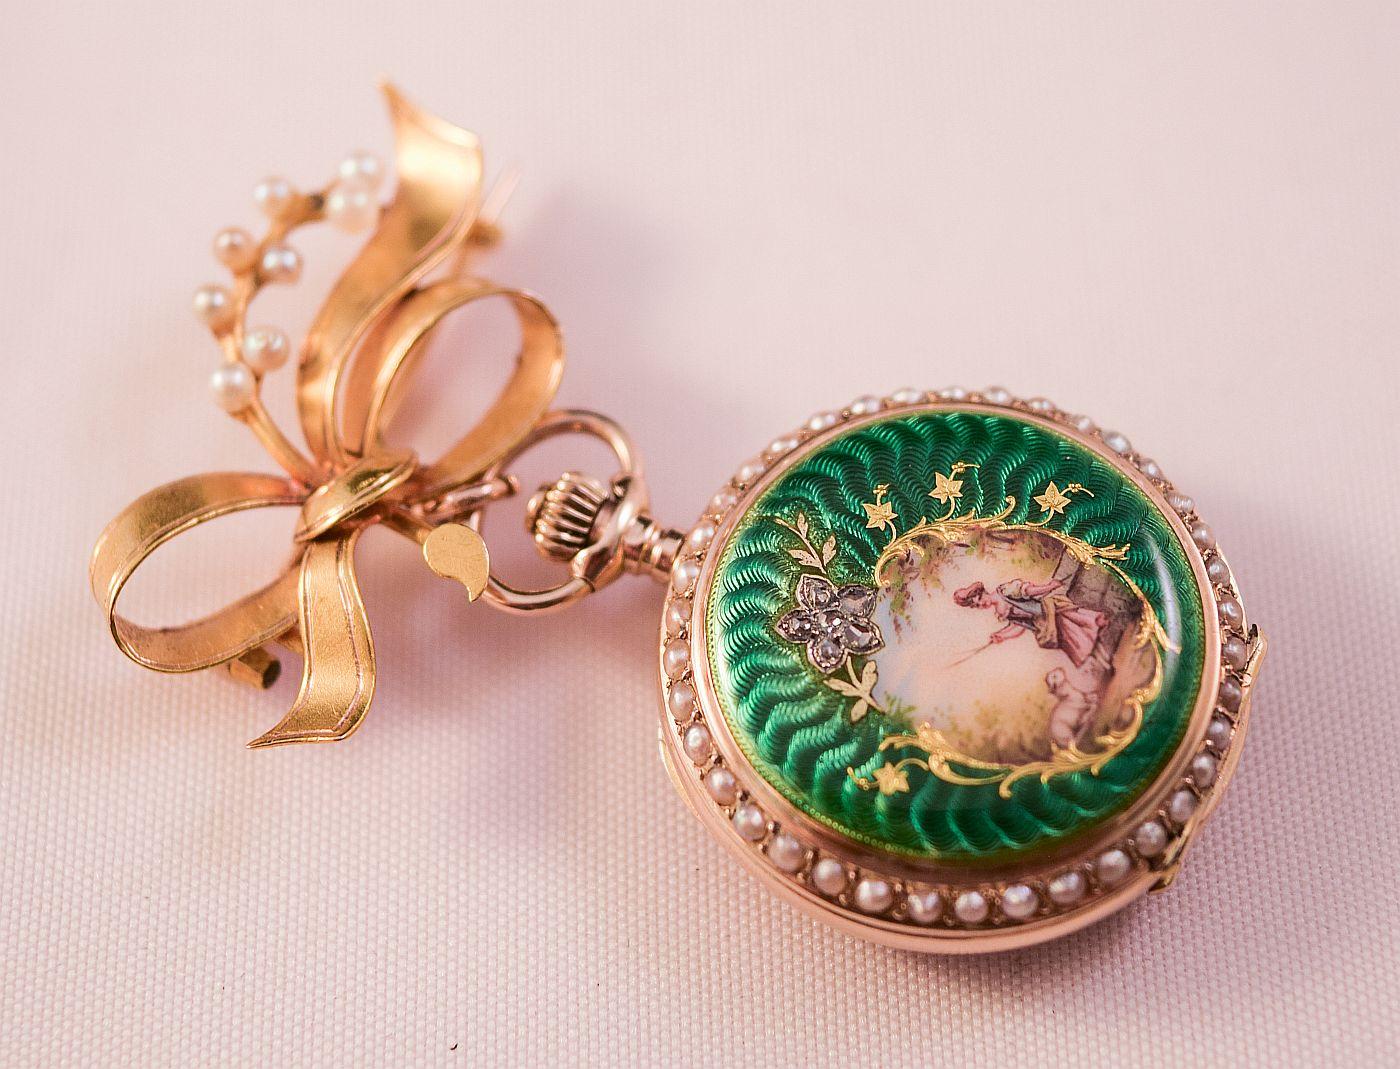 
An early gold,split pearl, rose cut diamonds and
 Beautiful Enamel fob watch.
Hunter case with top winding.
Cut and setting of the Rose cut diamonds prevents total carat weight estimation,
Lovely Green enamel  background on both sides with also